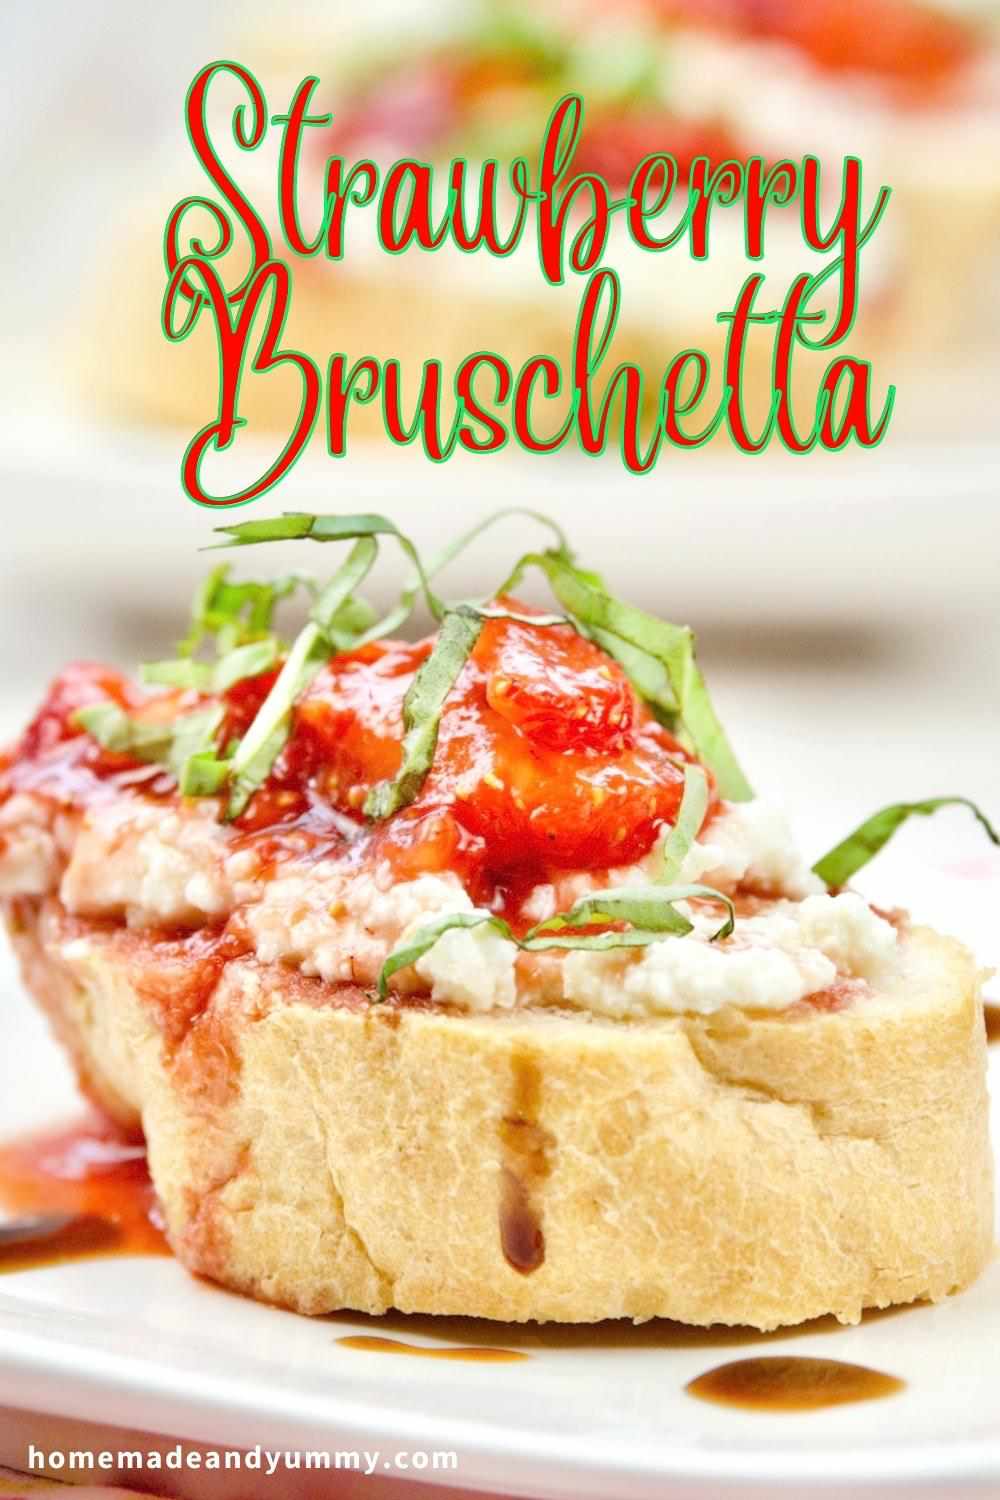 Strawberry Bruschetta is perfect for an easy summer appetizer.